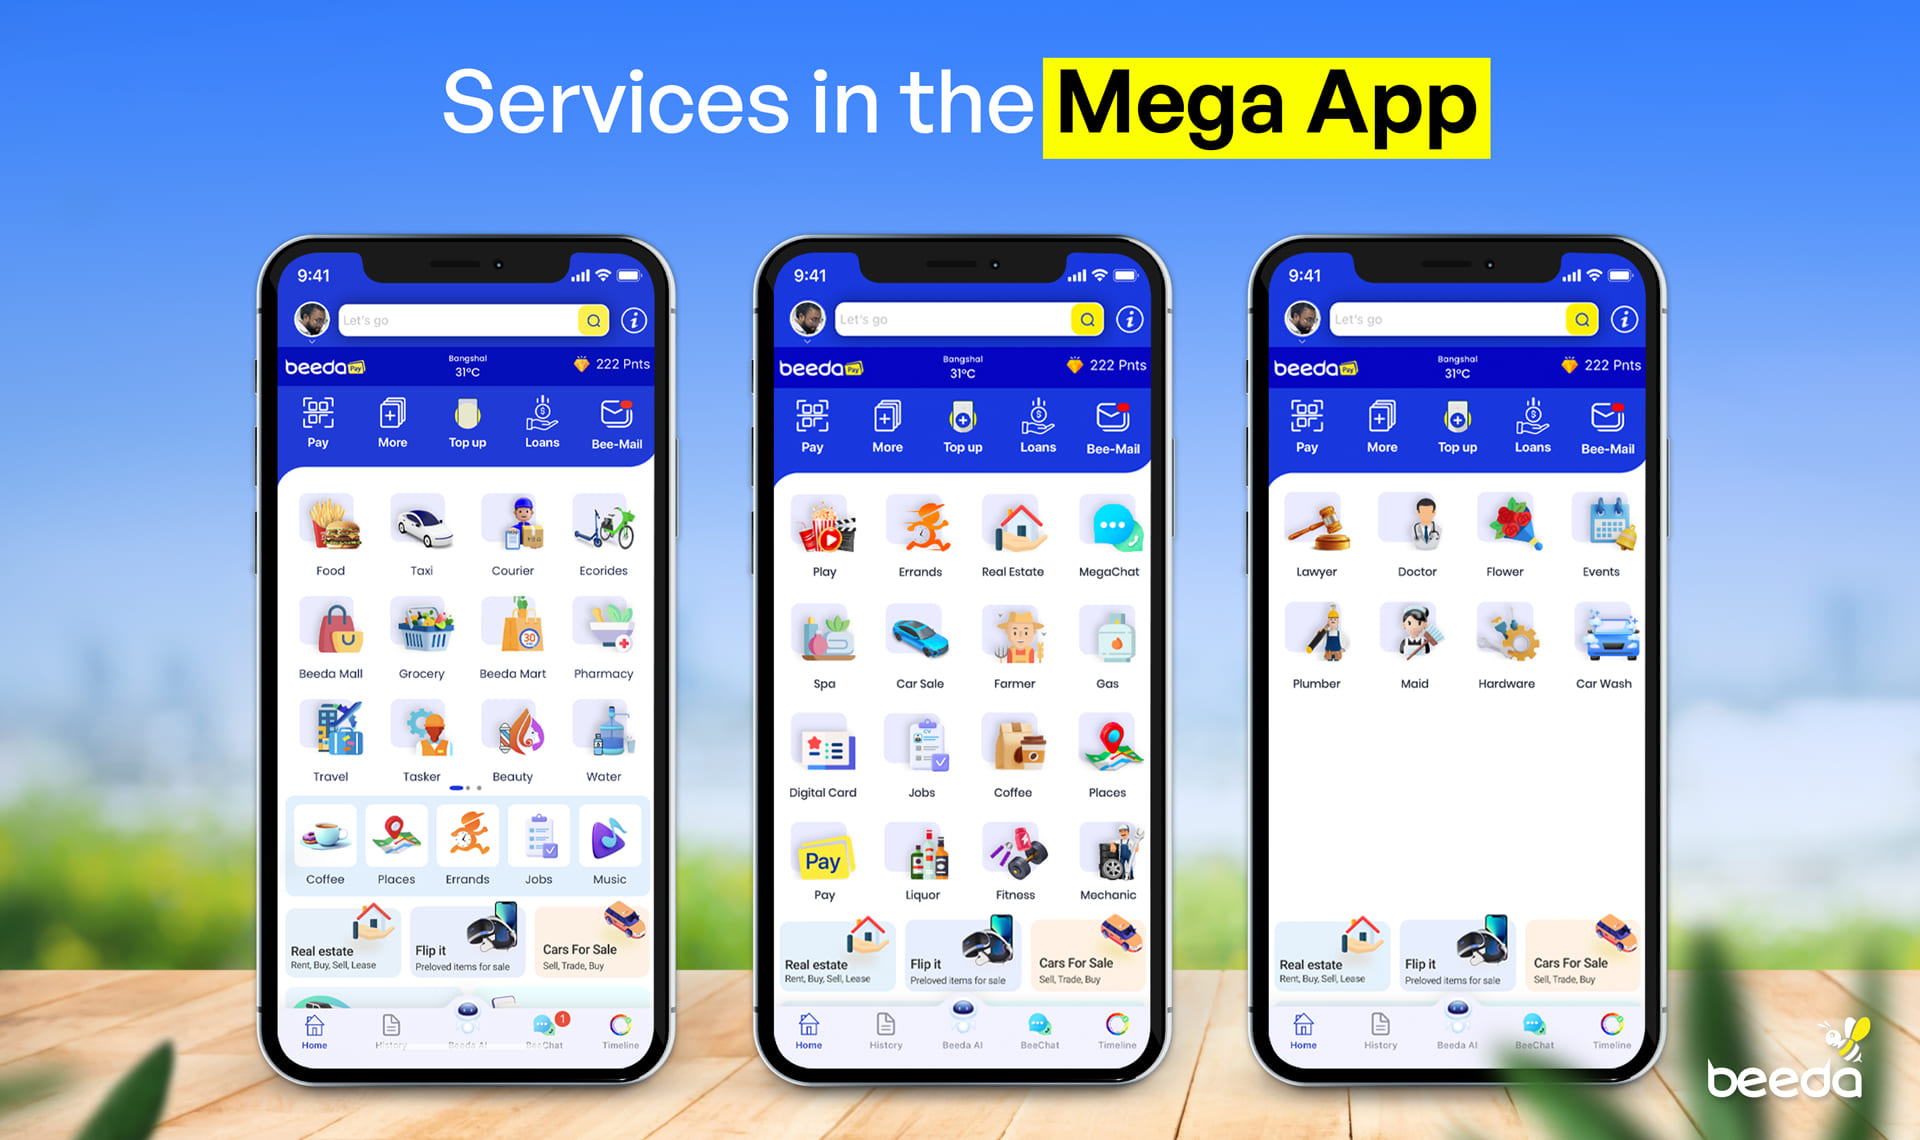 Services in the Mega App